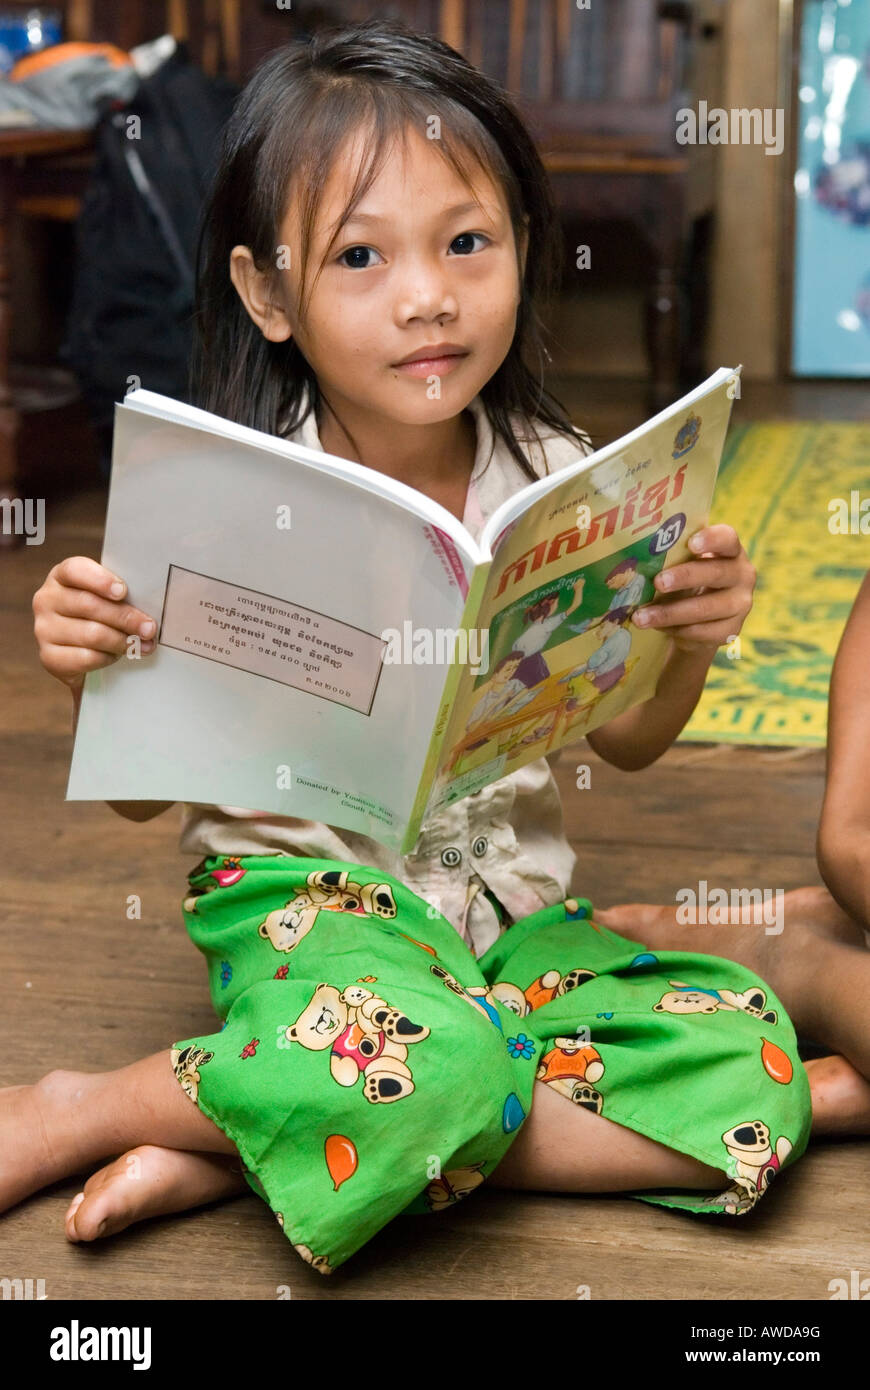 Portrait of a girl with school book, Koh Kong Province, Cambodia Stock Photo